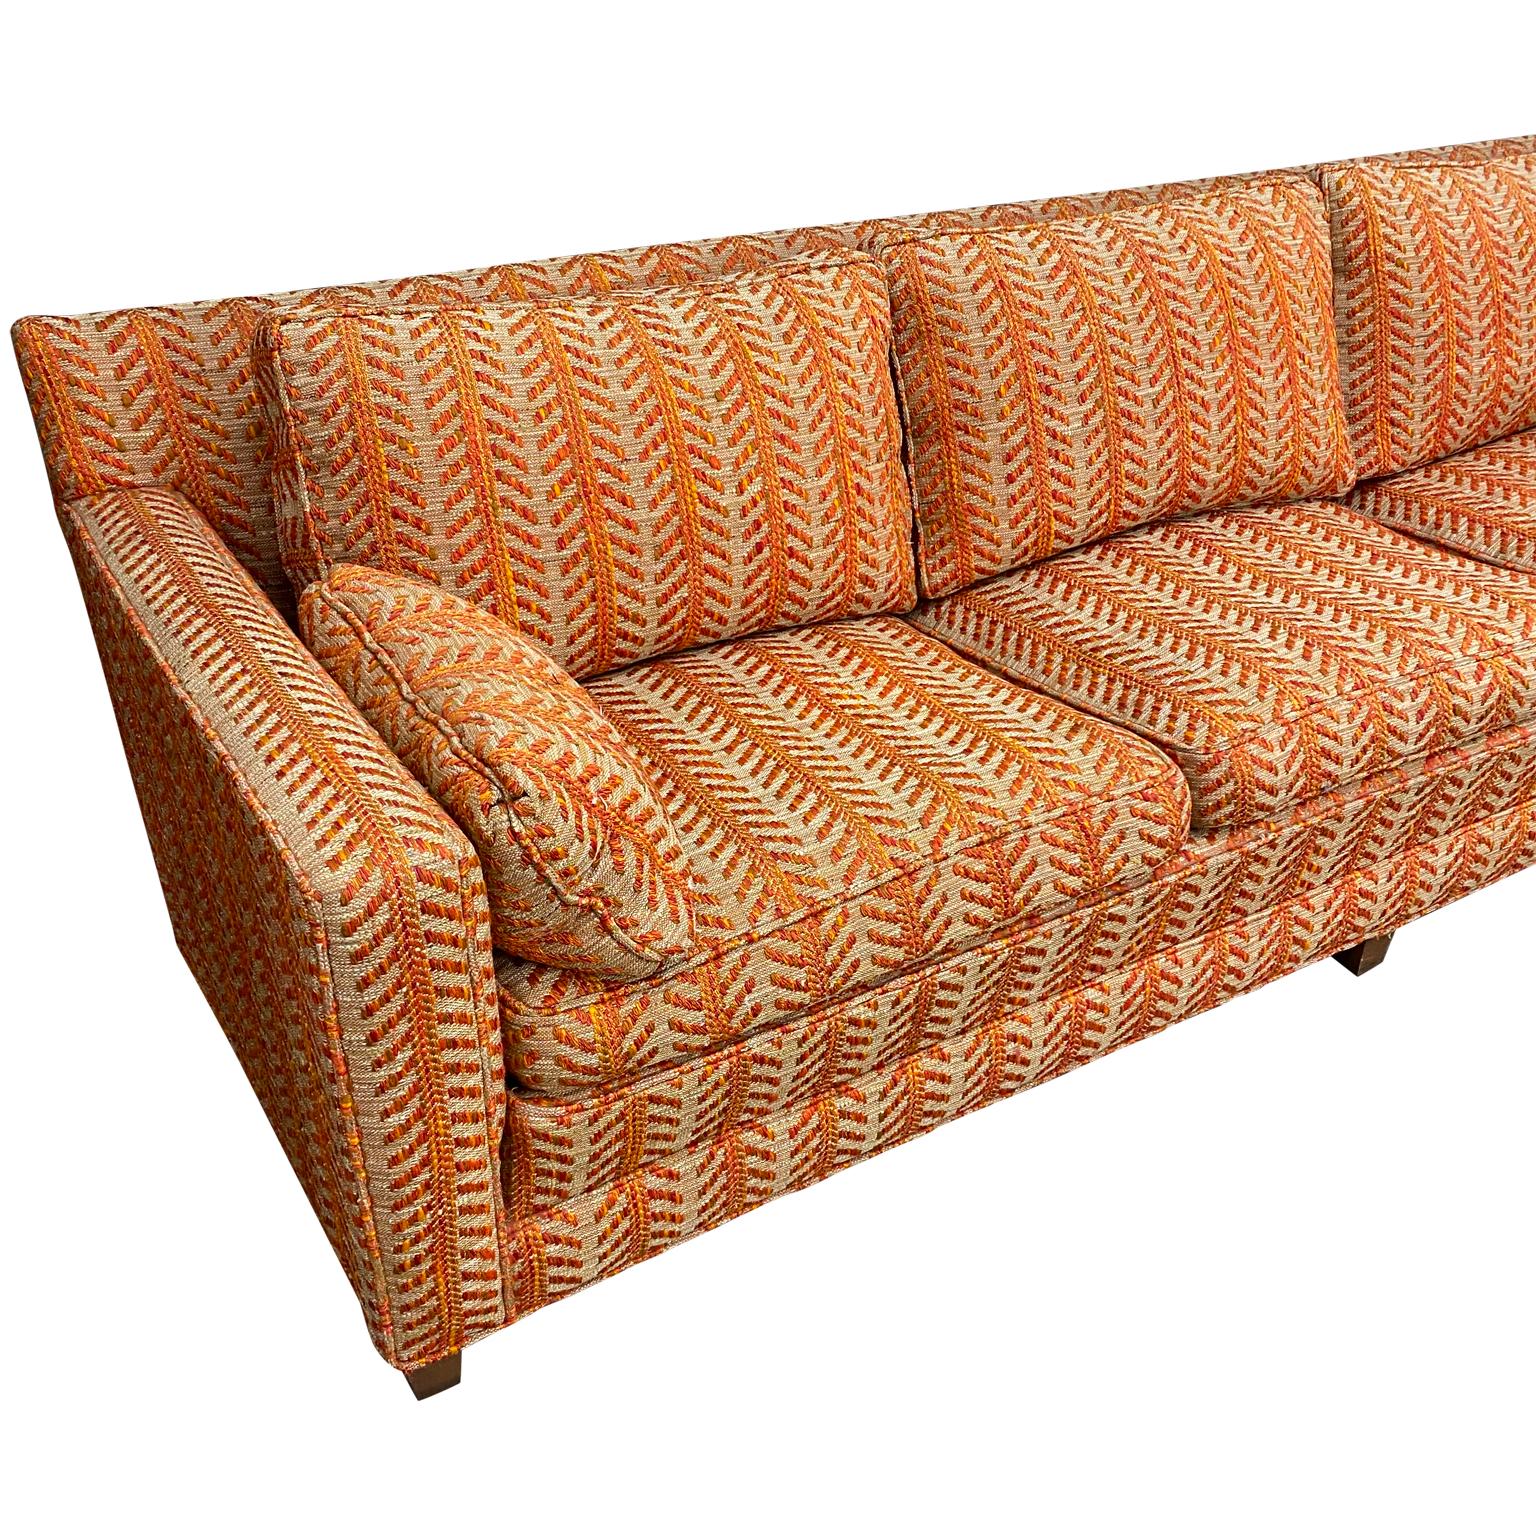 Sink right into this iconic 1960s John Stuart, Inc. long sofa. With it’s colorful orange and creamy chevron patterned fabric, you can fit the whole party on this incredibly deep sofa, stuffed with down and feathers. Original upholstery, original